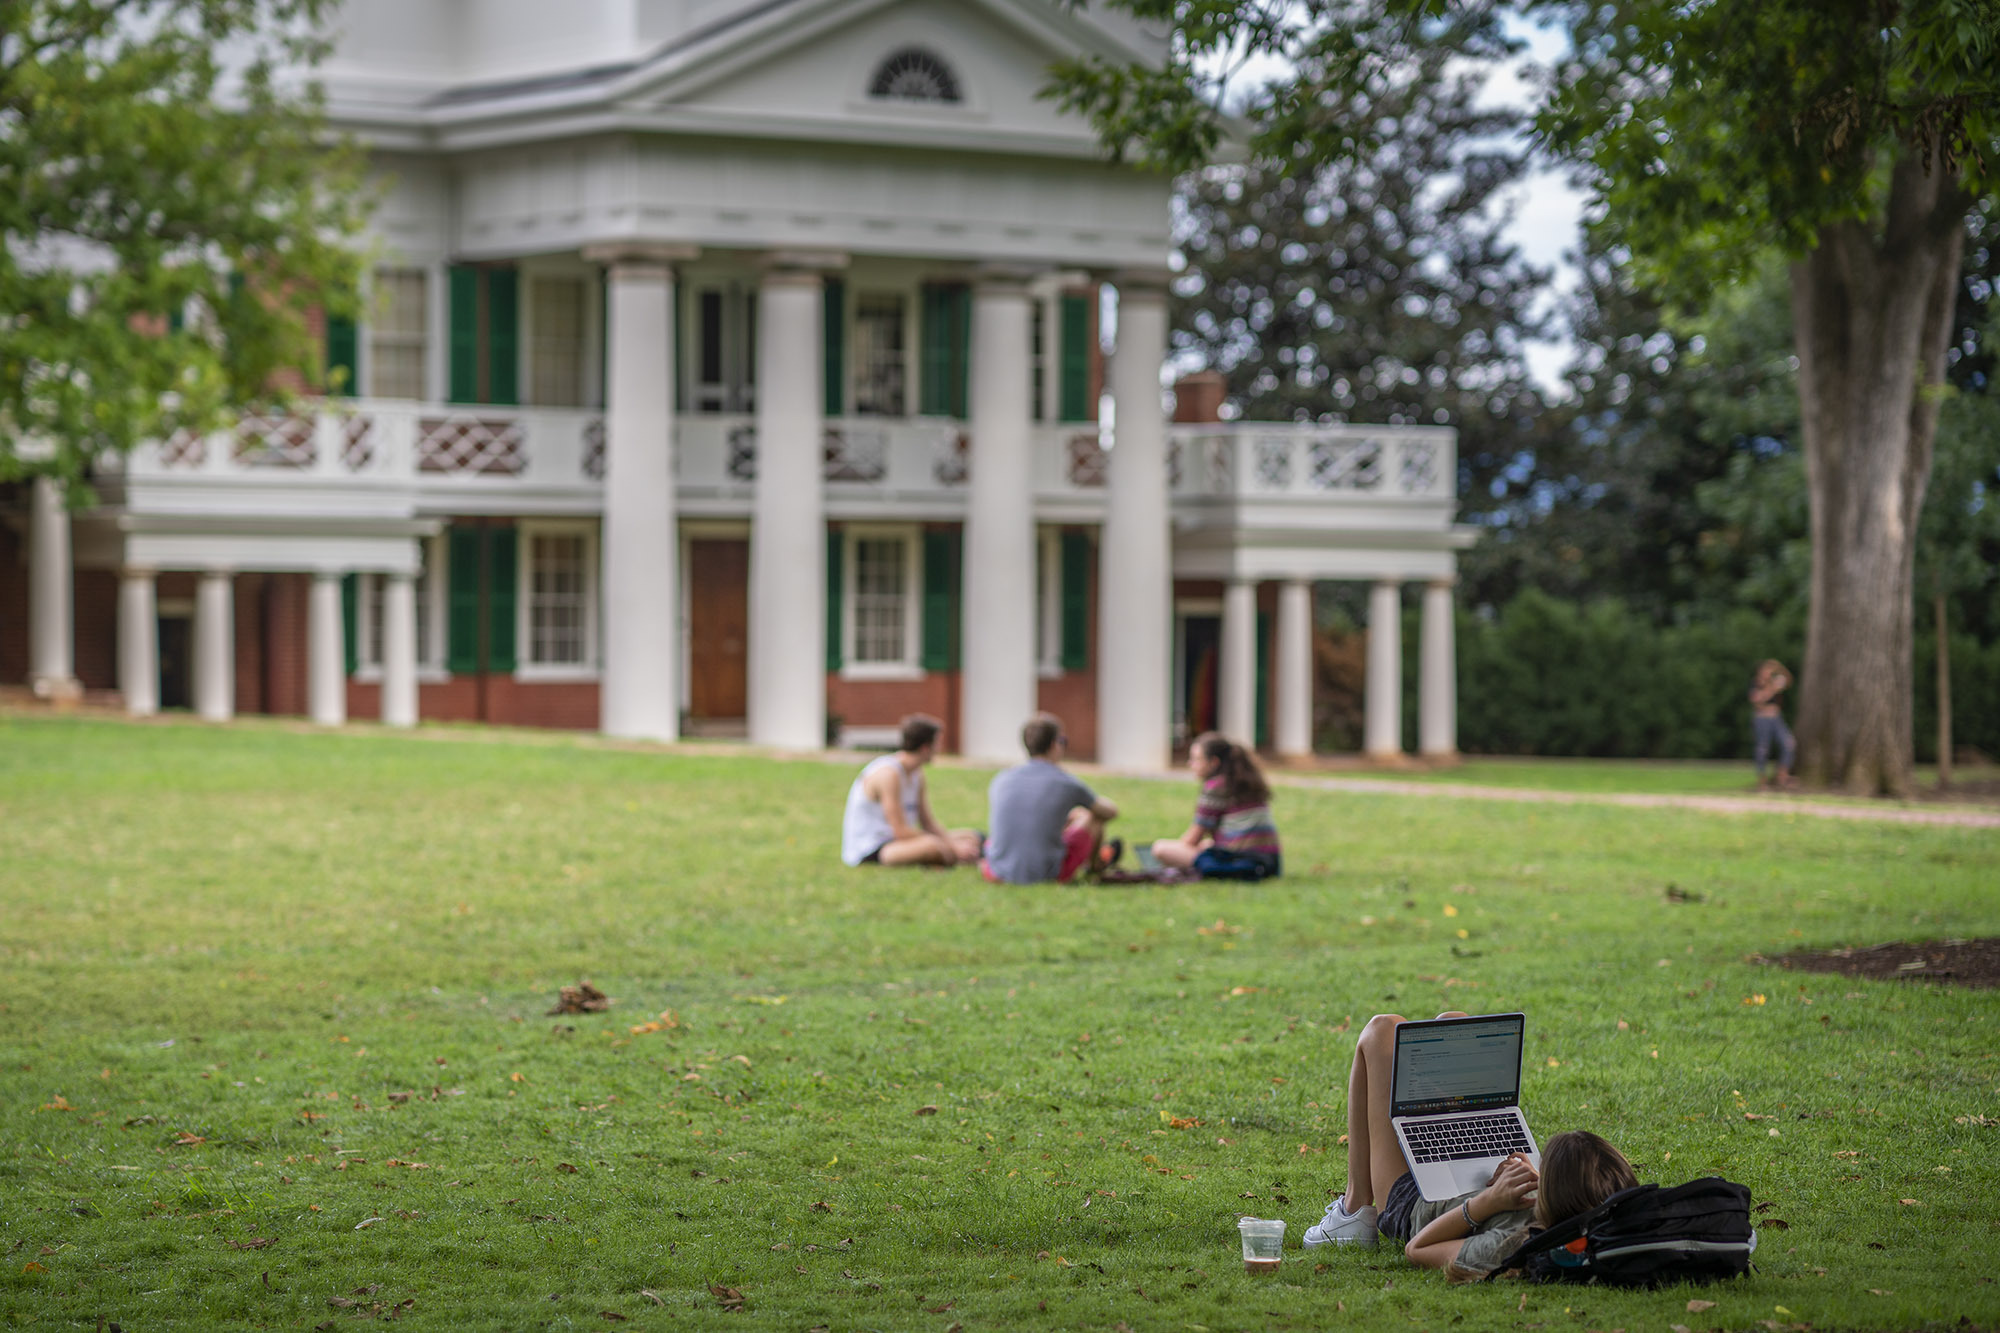 Students sitting on the Lawn